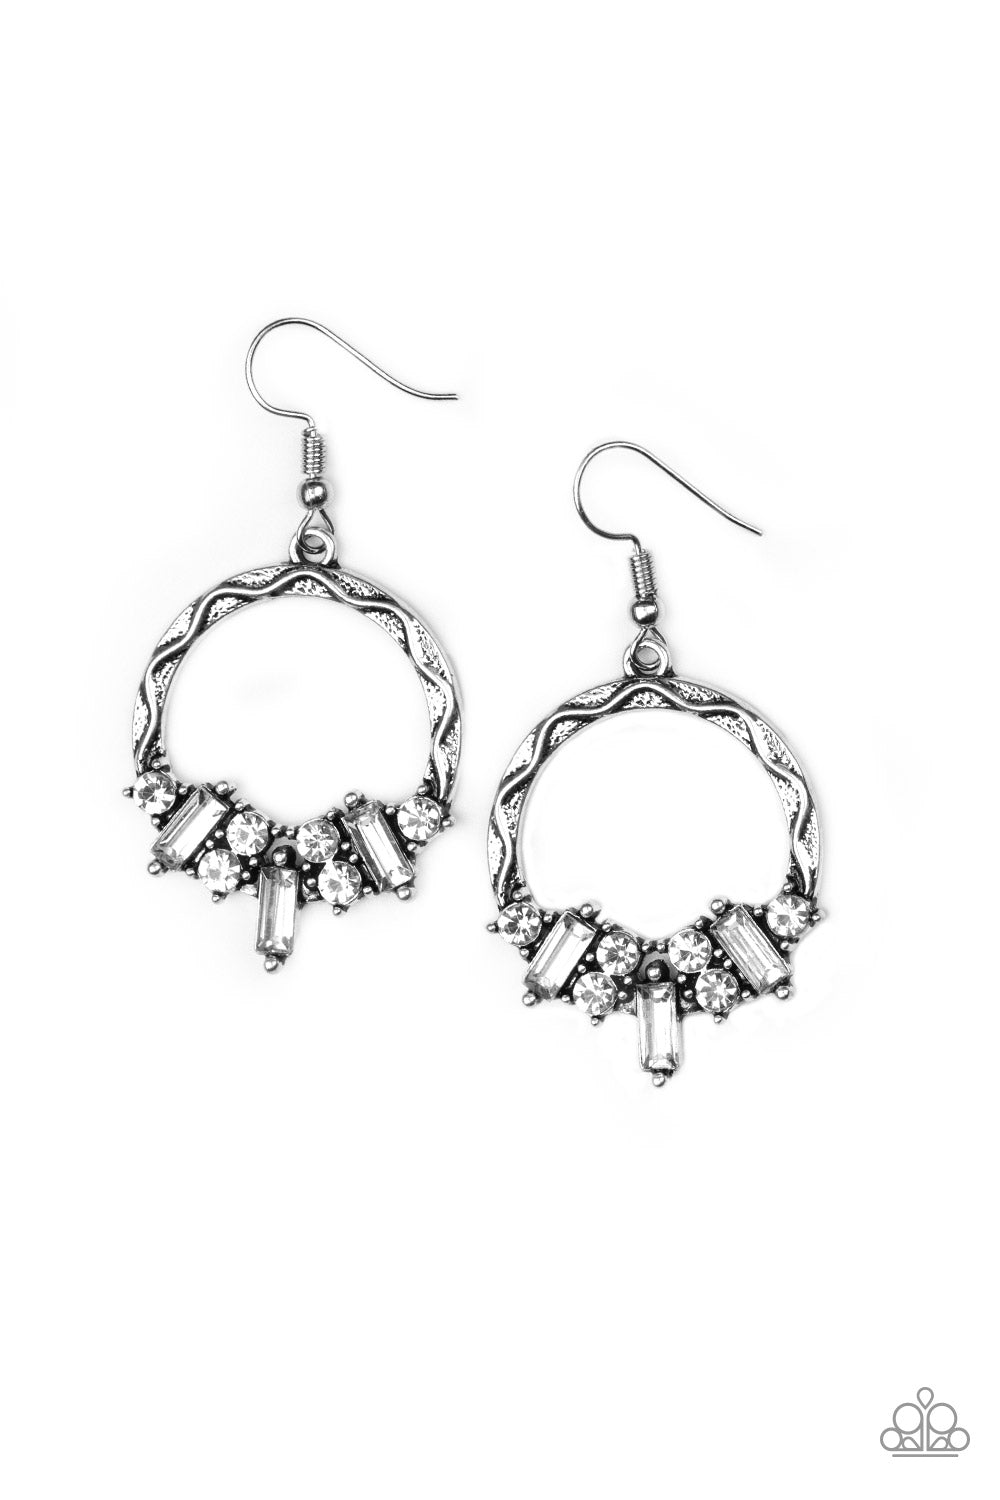 ON THE UPTREND - SILVER EARRING